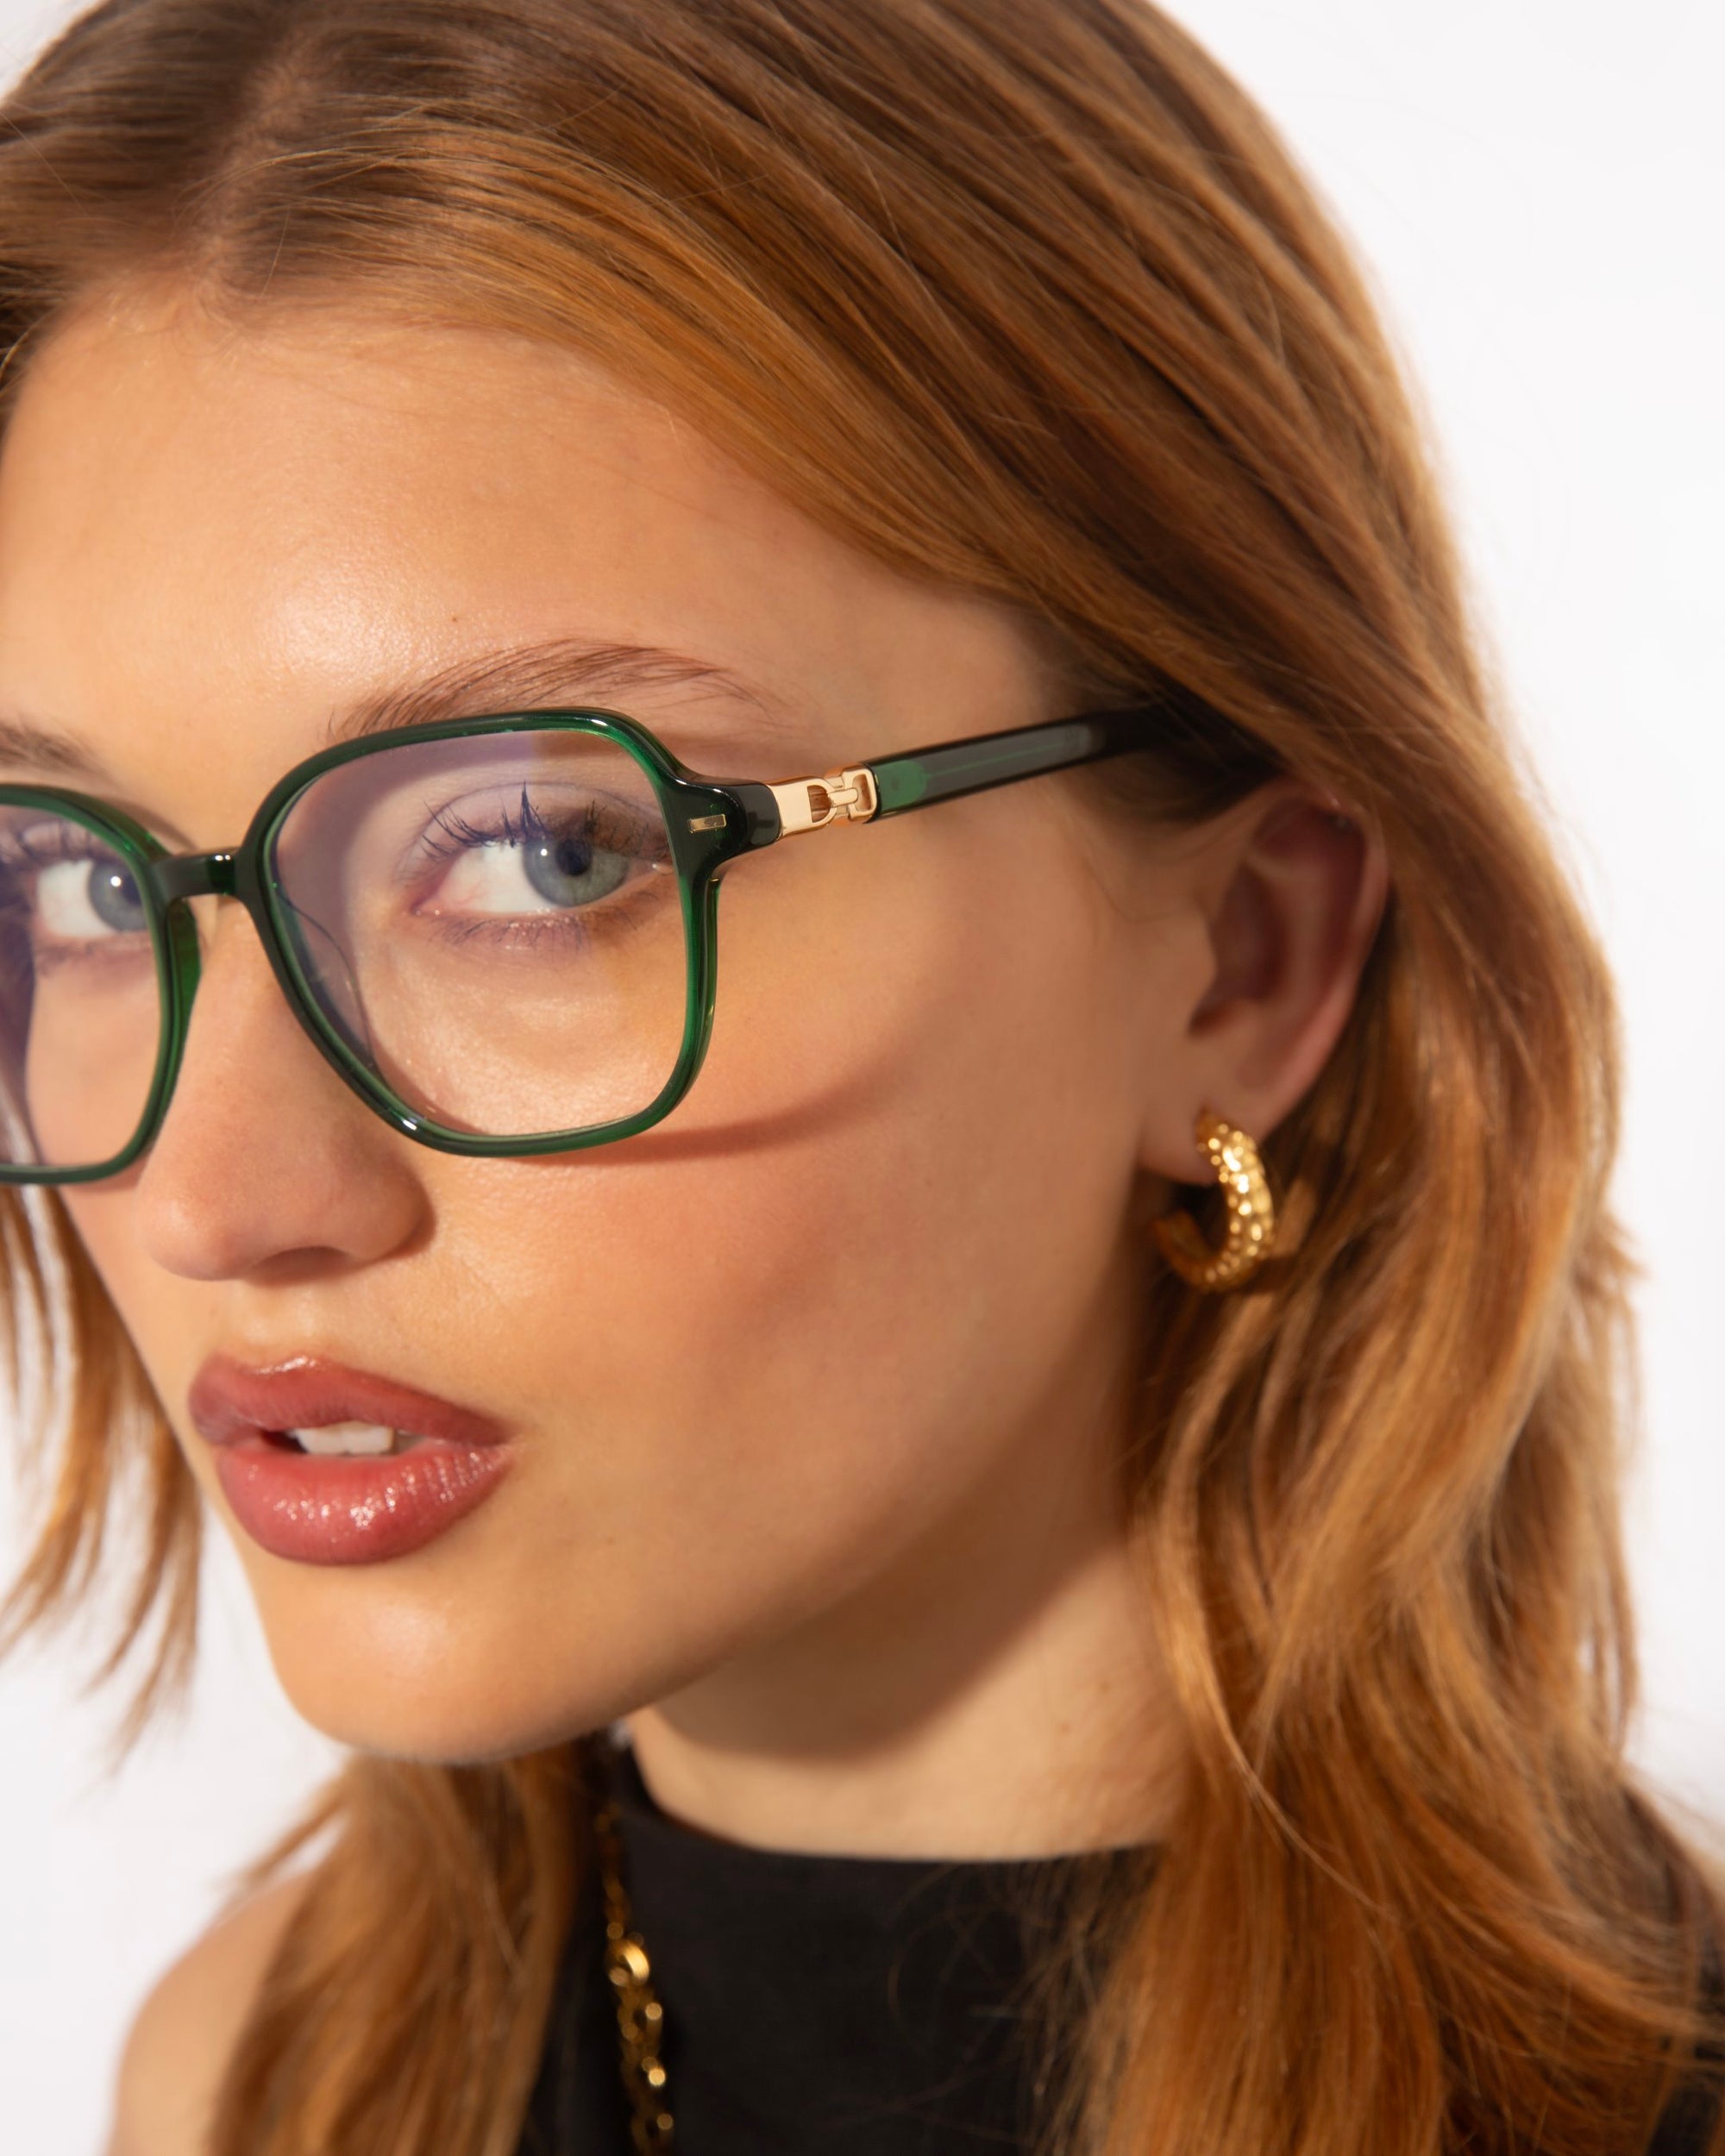 A person with long, light brown hair wears large, green-framed For Art's Sake® Charm cat-eye shaped glasses and hoop earrings. They have a neutral expression and are looking at the camera. The background is plain white.